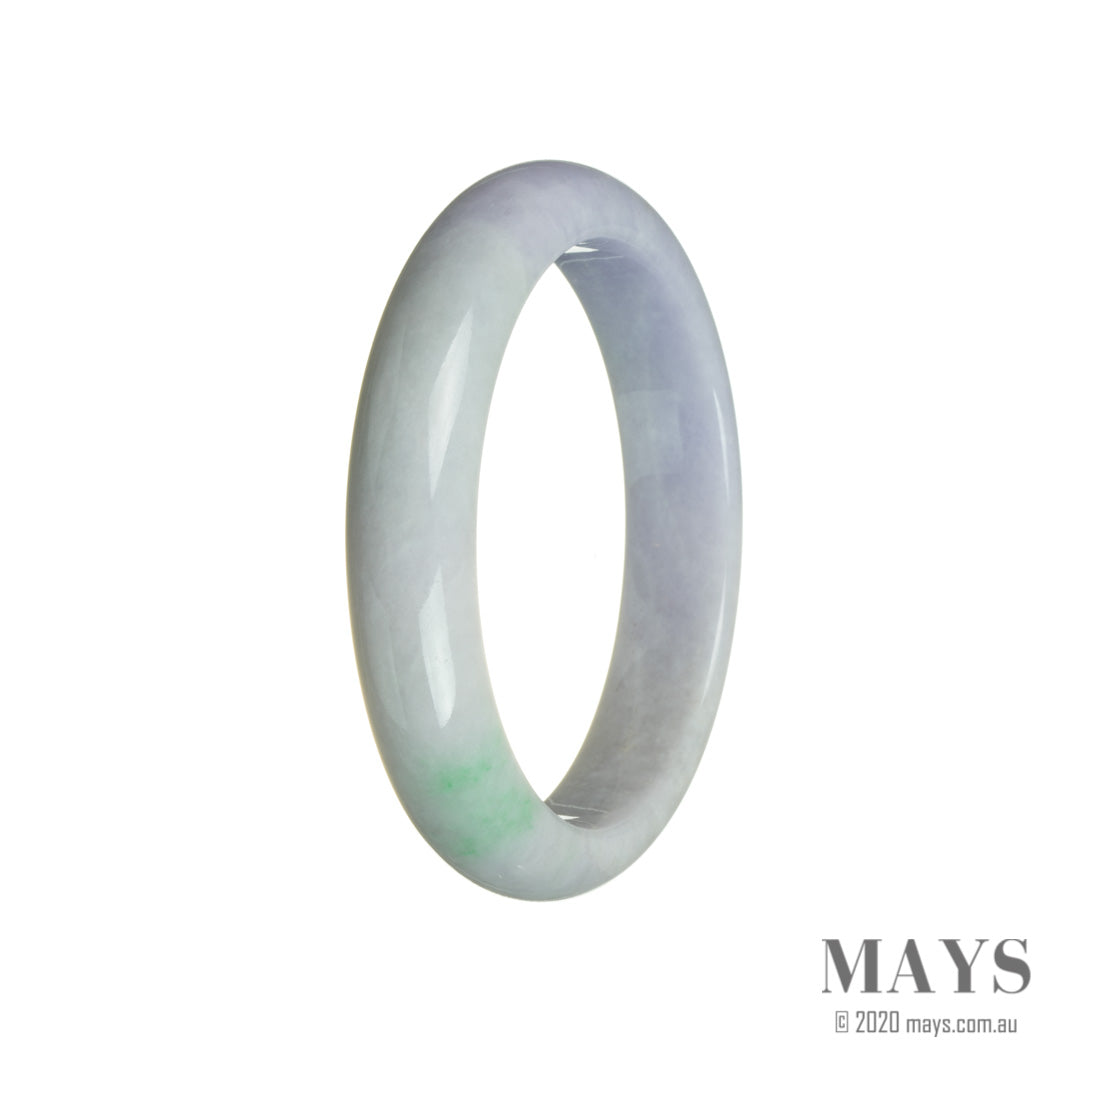 A lavender jadeite bangle bracelet in a half moon shape, with a grade A quality.